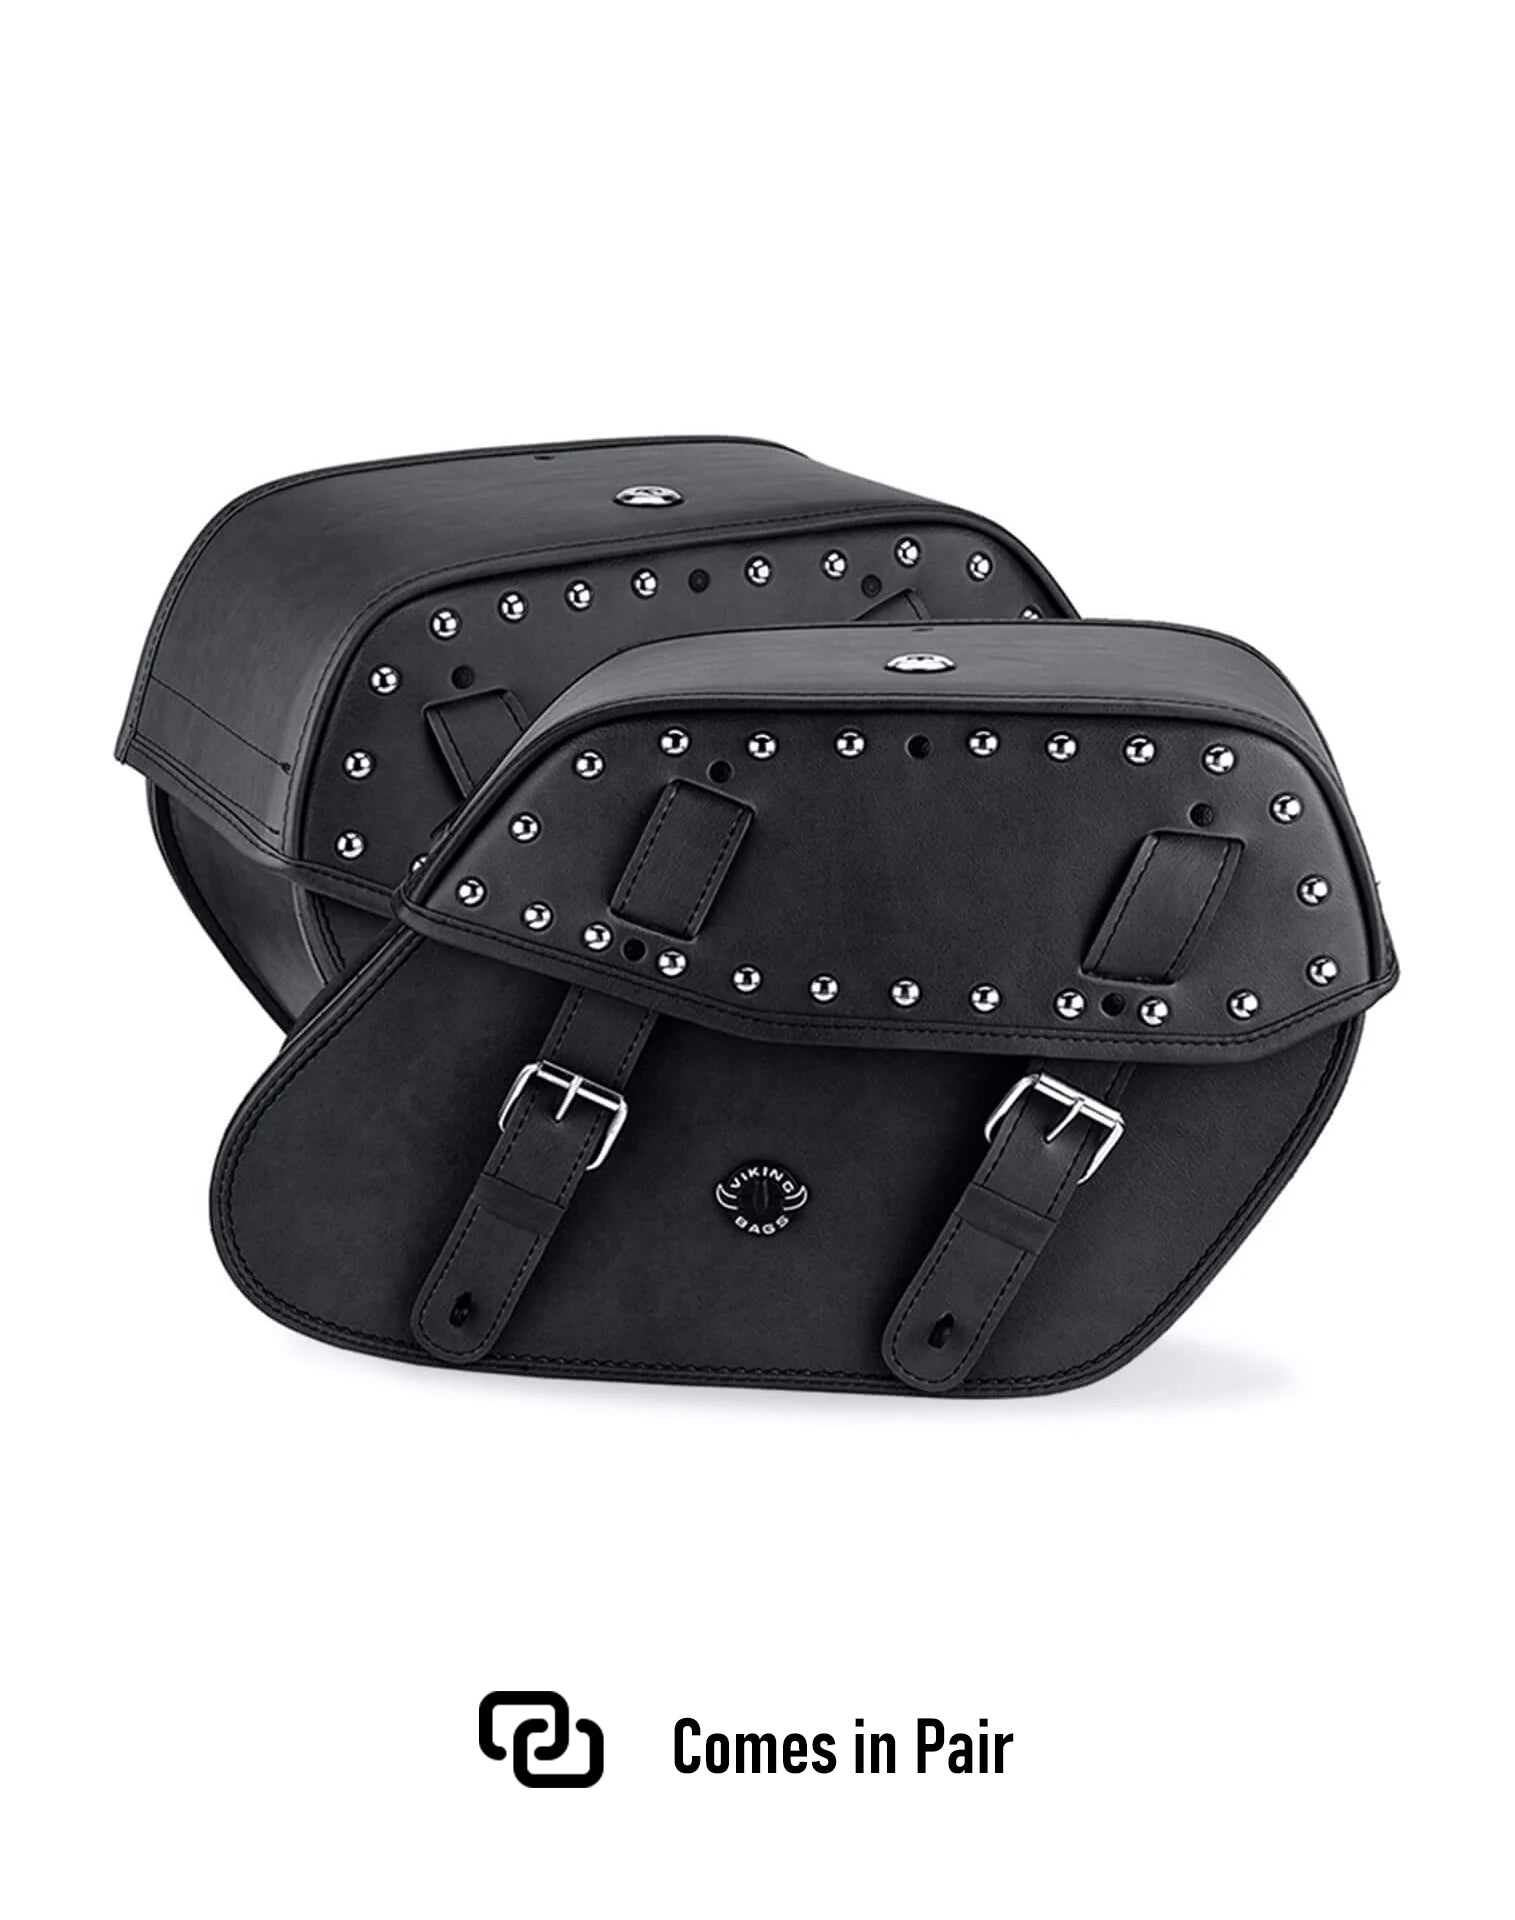 Viking Odin Large Triumph Rocket Iii Roadster Studded Leather Motorcycle Saddlebags Weather Resistant Bags Comes in Pair